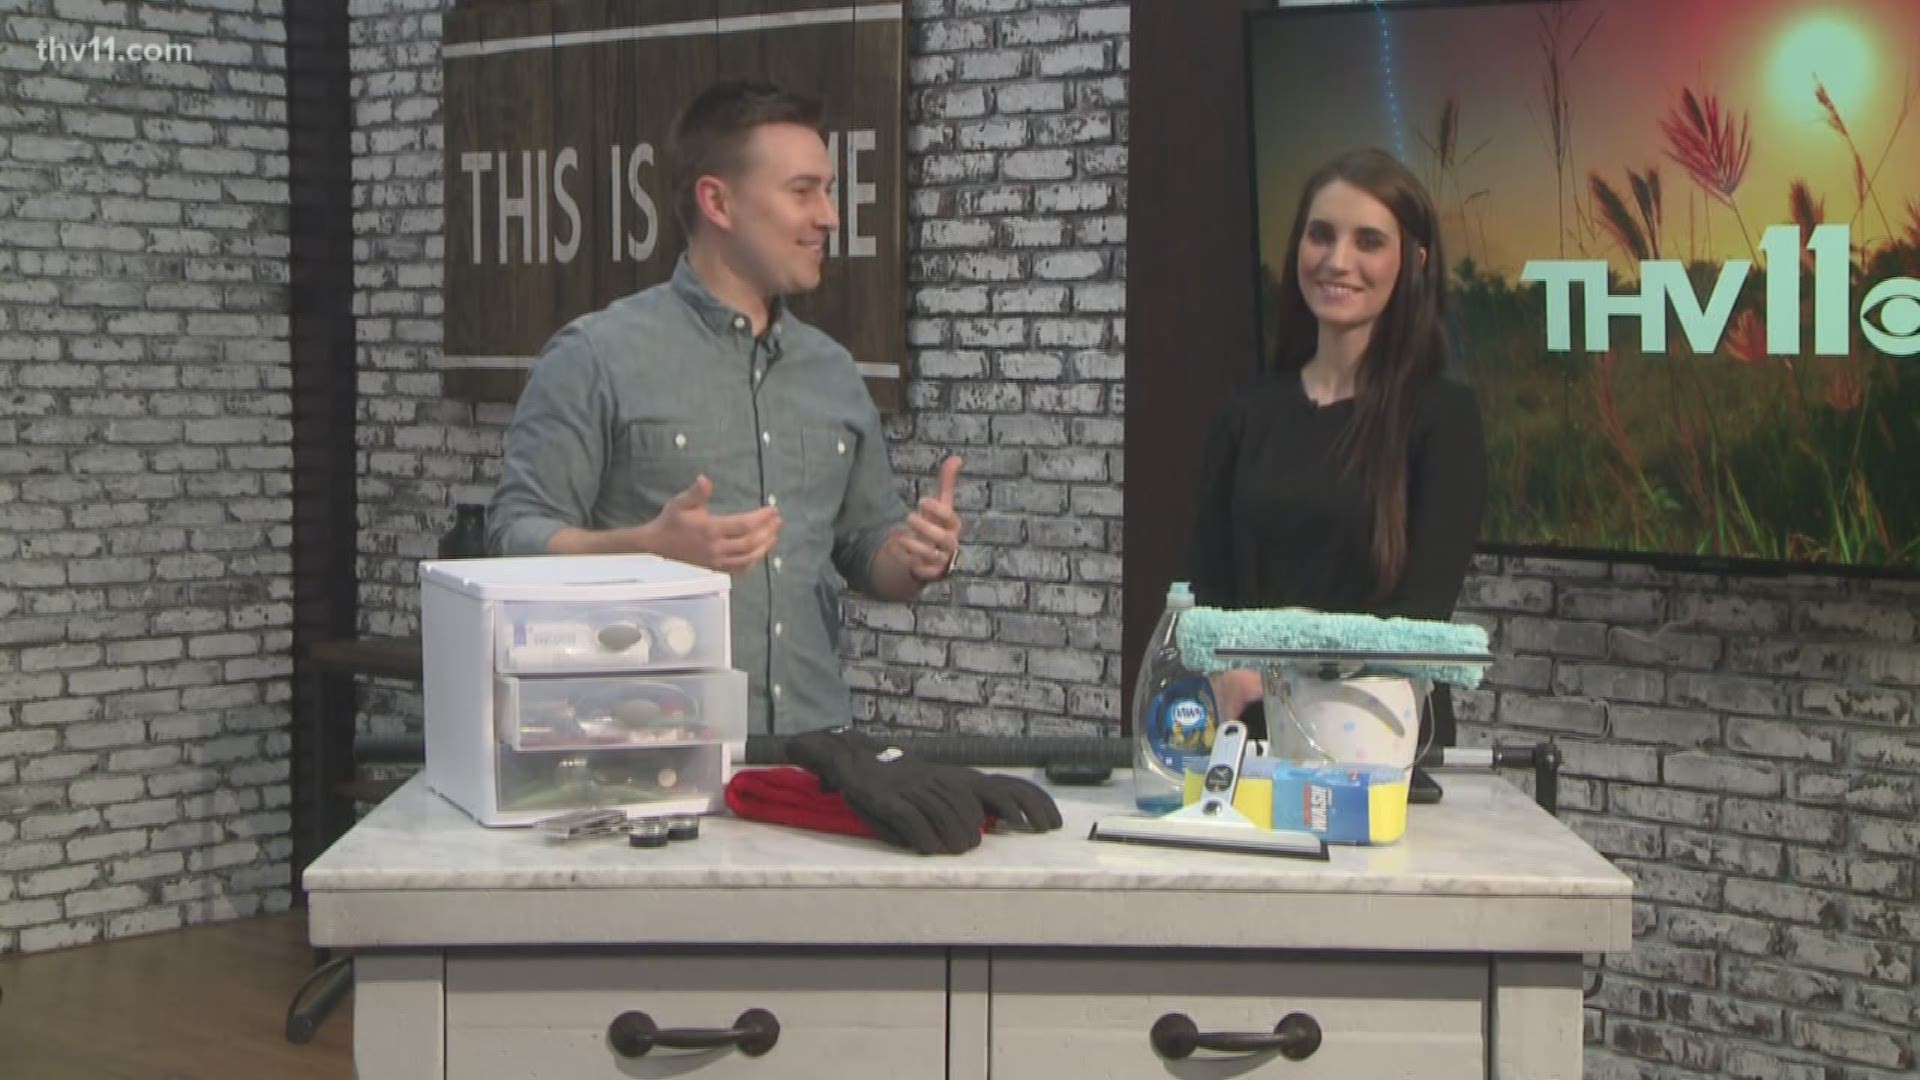 Paul Kroger is here this morning with some tips for freshening up your home.